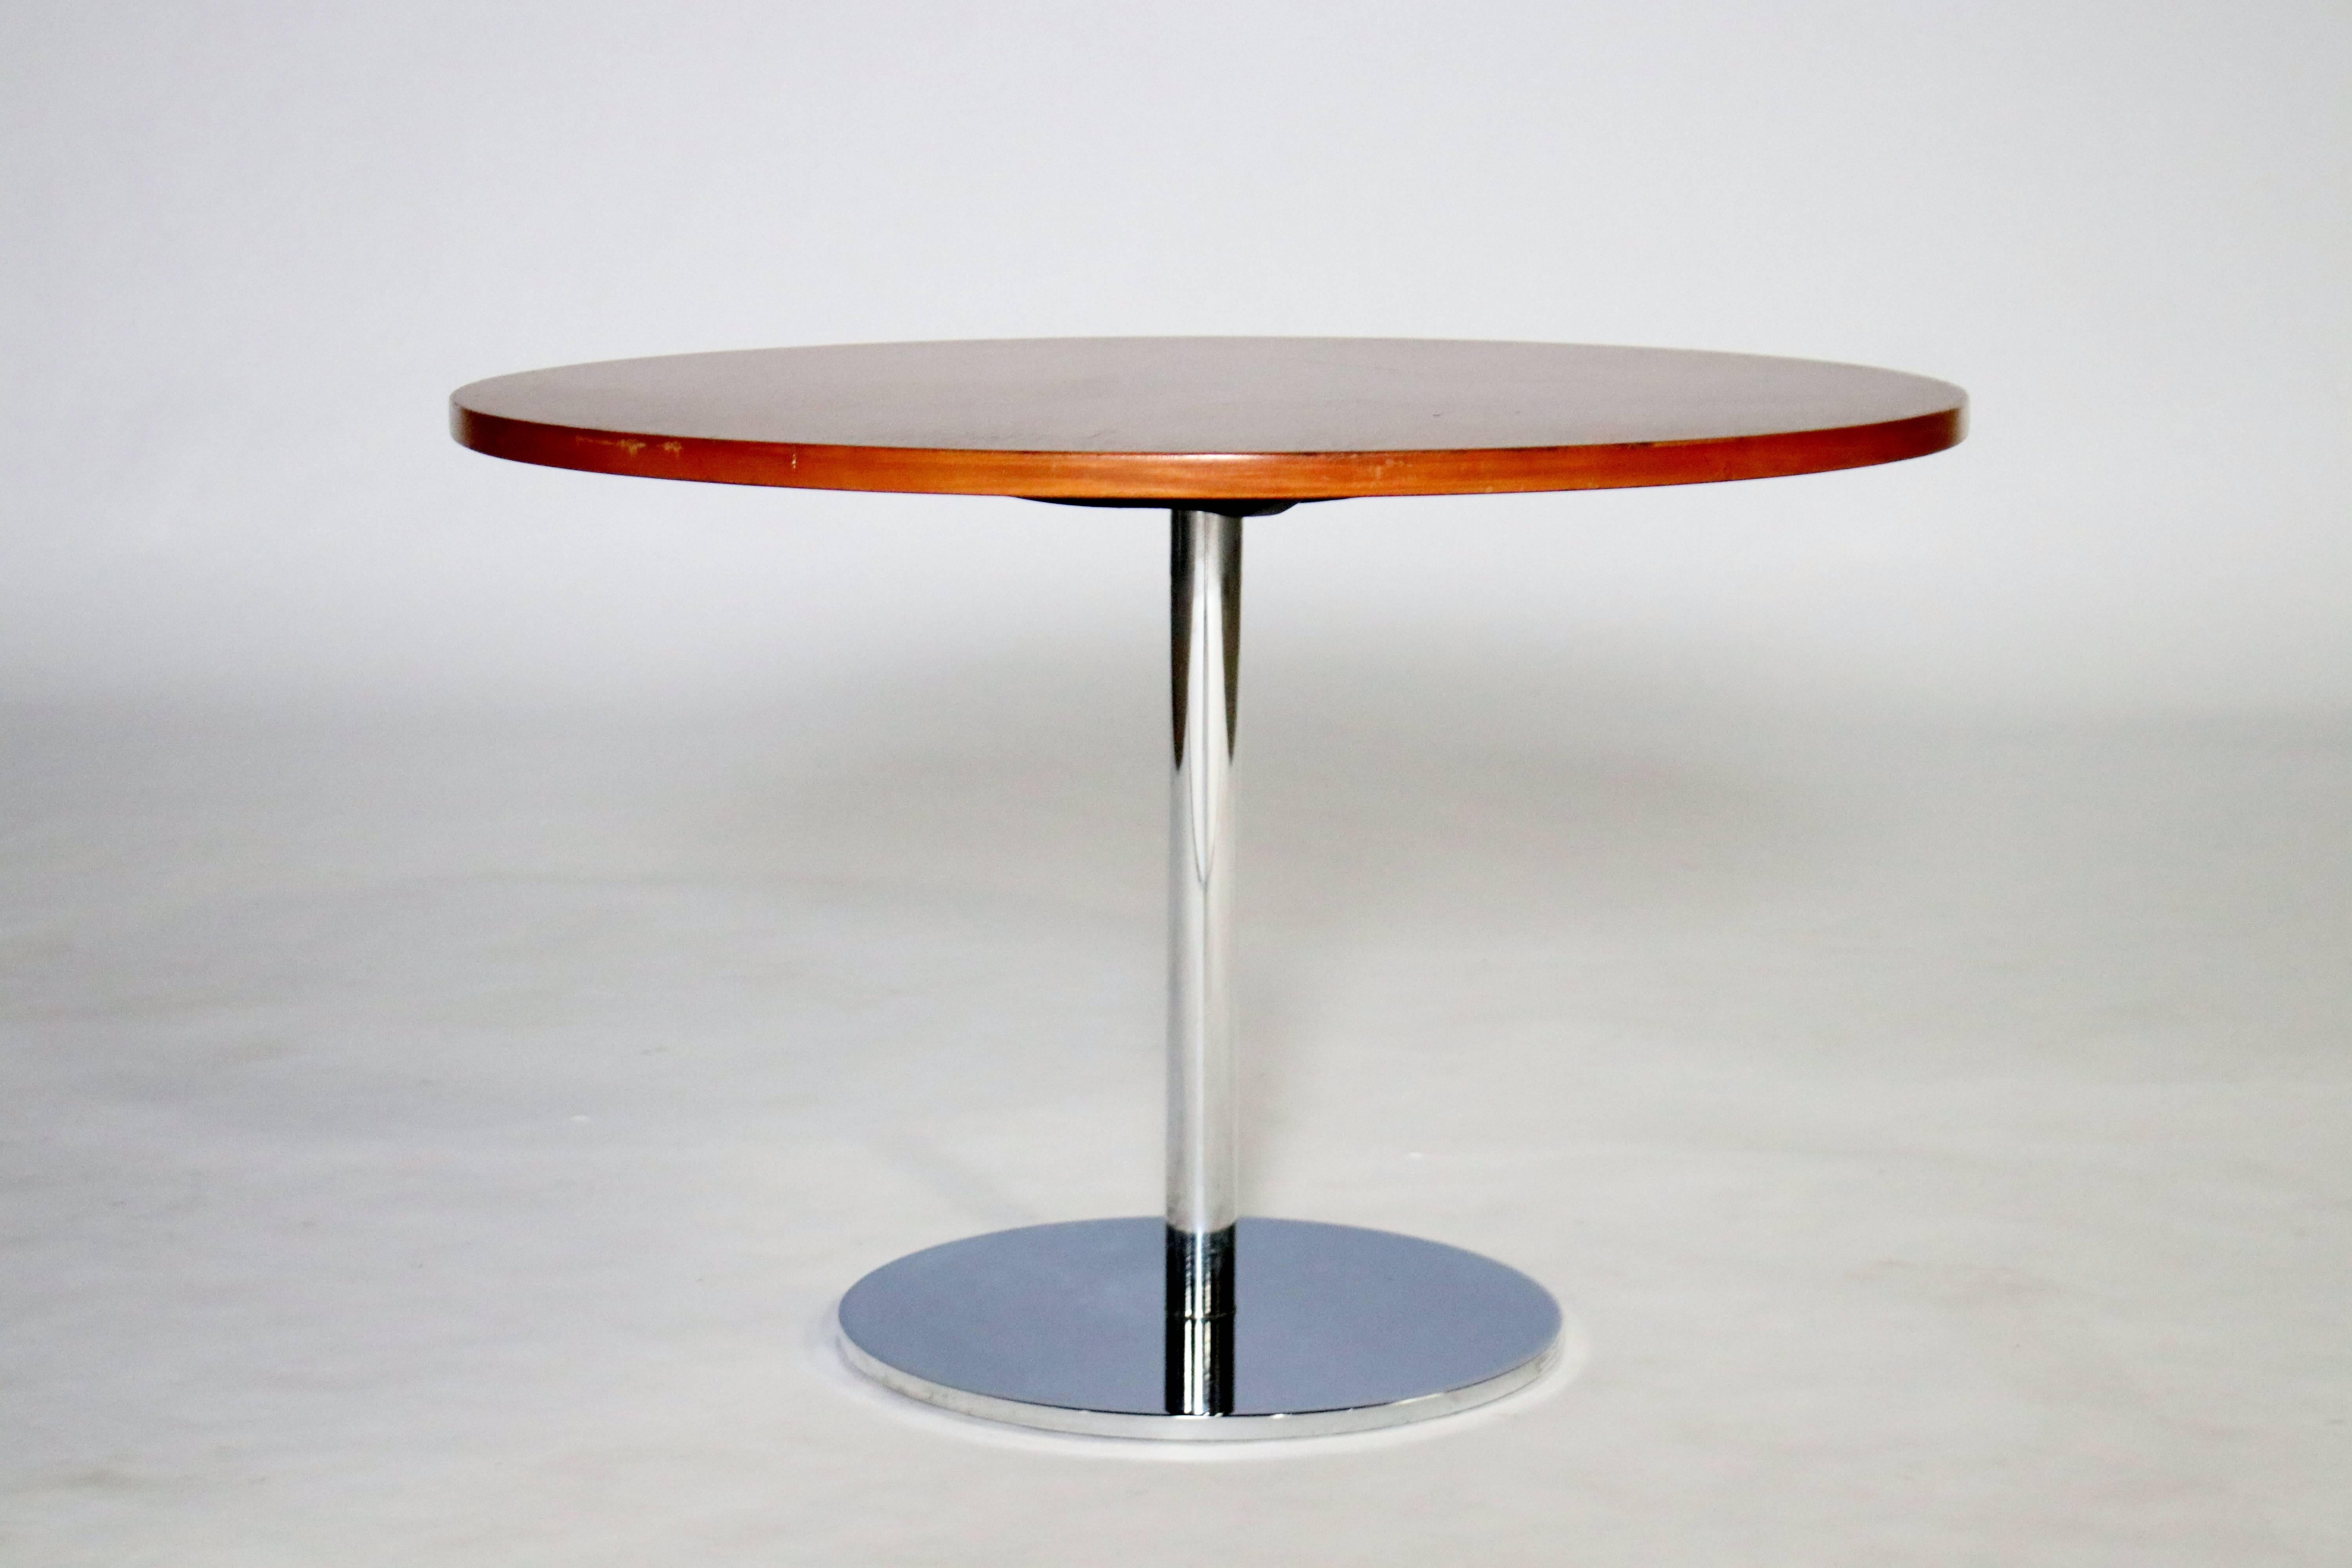 Occasional or side table design by Hugh Acton in chrome steel and walnut top.